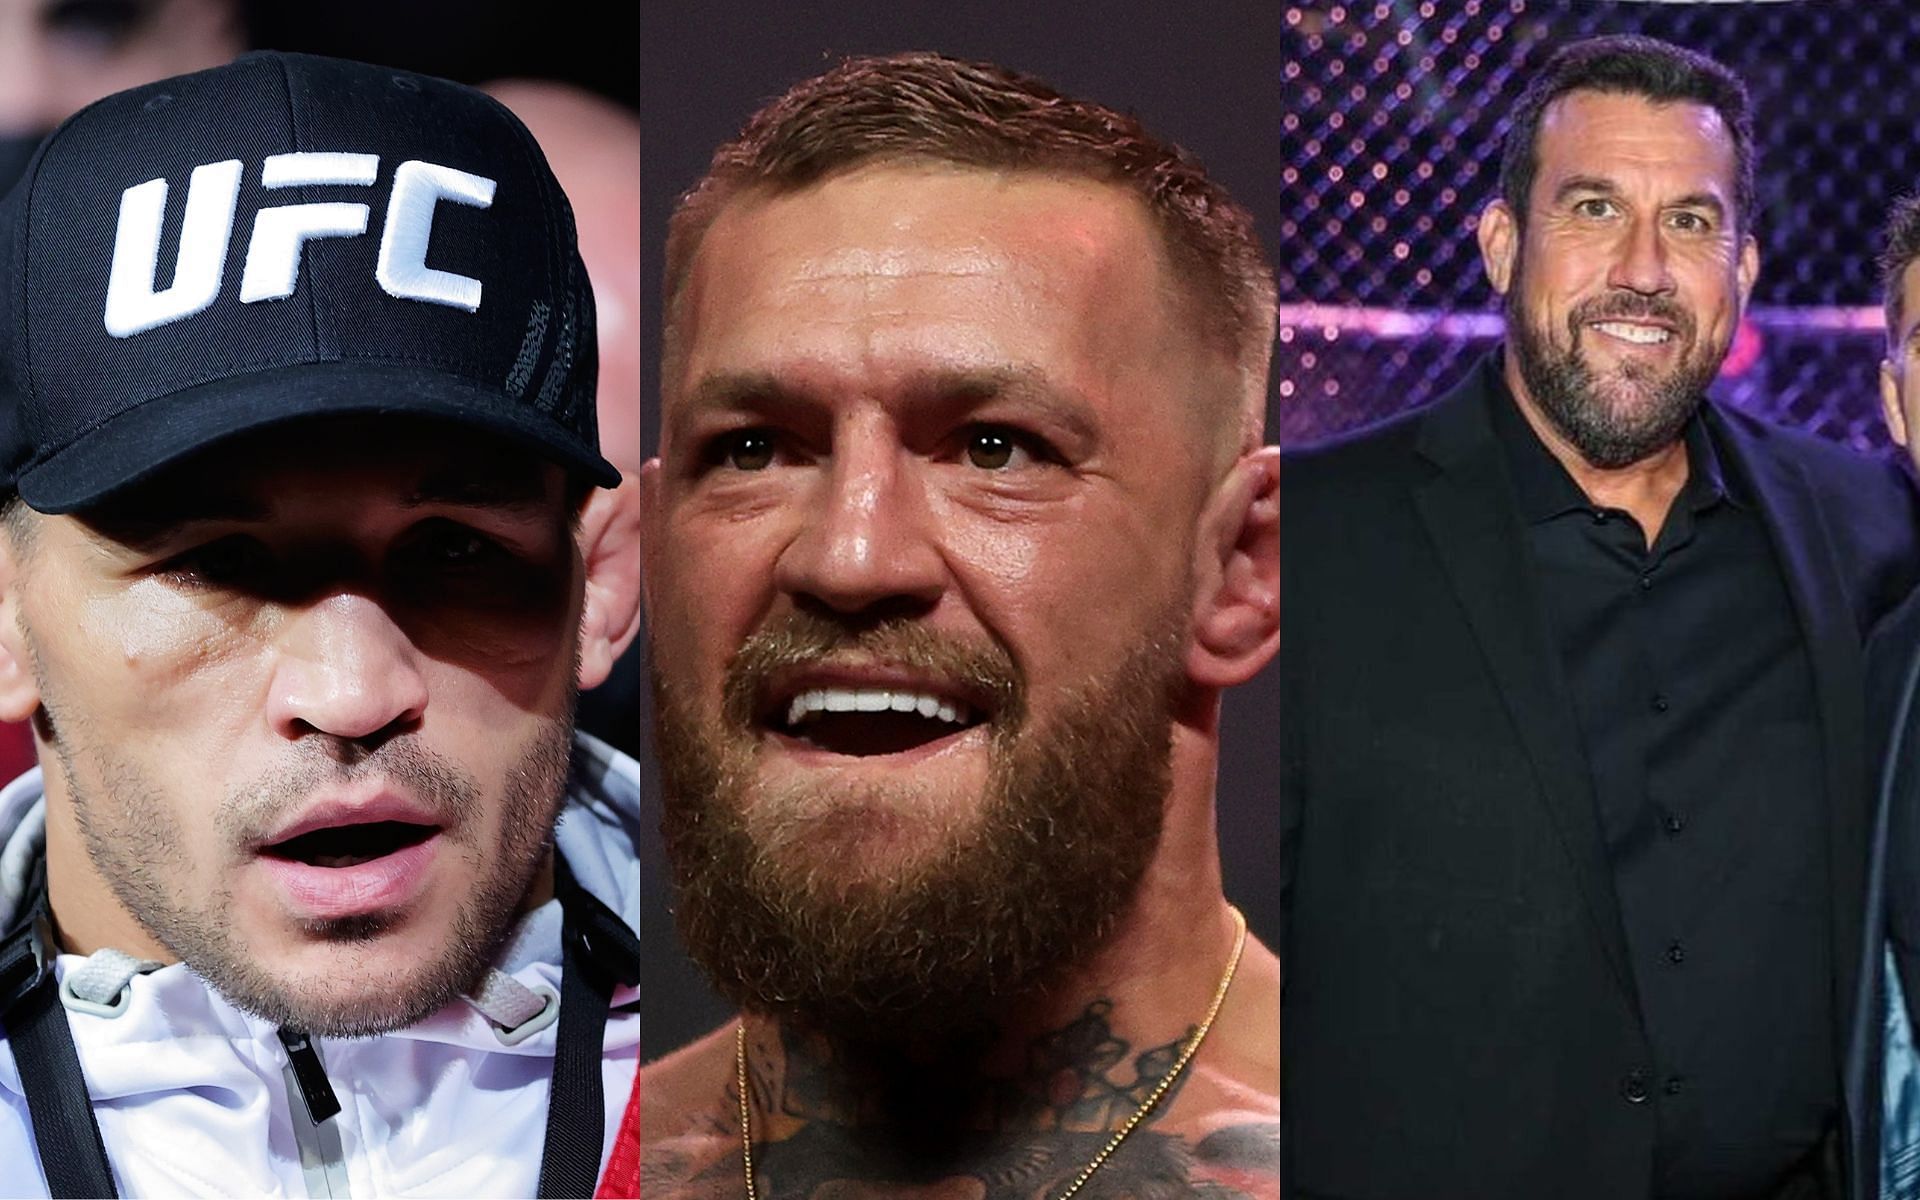 Michael Chandler (Left), Conor McGregor (Middle), and John McCarthy (Right) [Image courtesy: left and middle images via Getty Images; right image via @therealpunk Instagram]